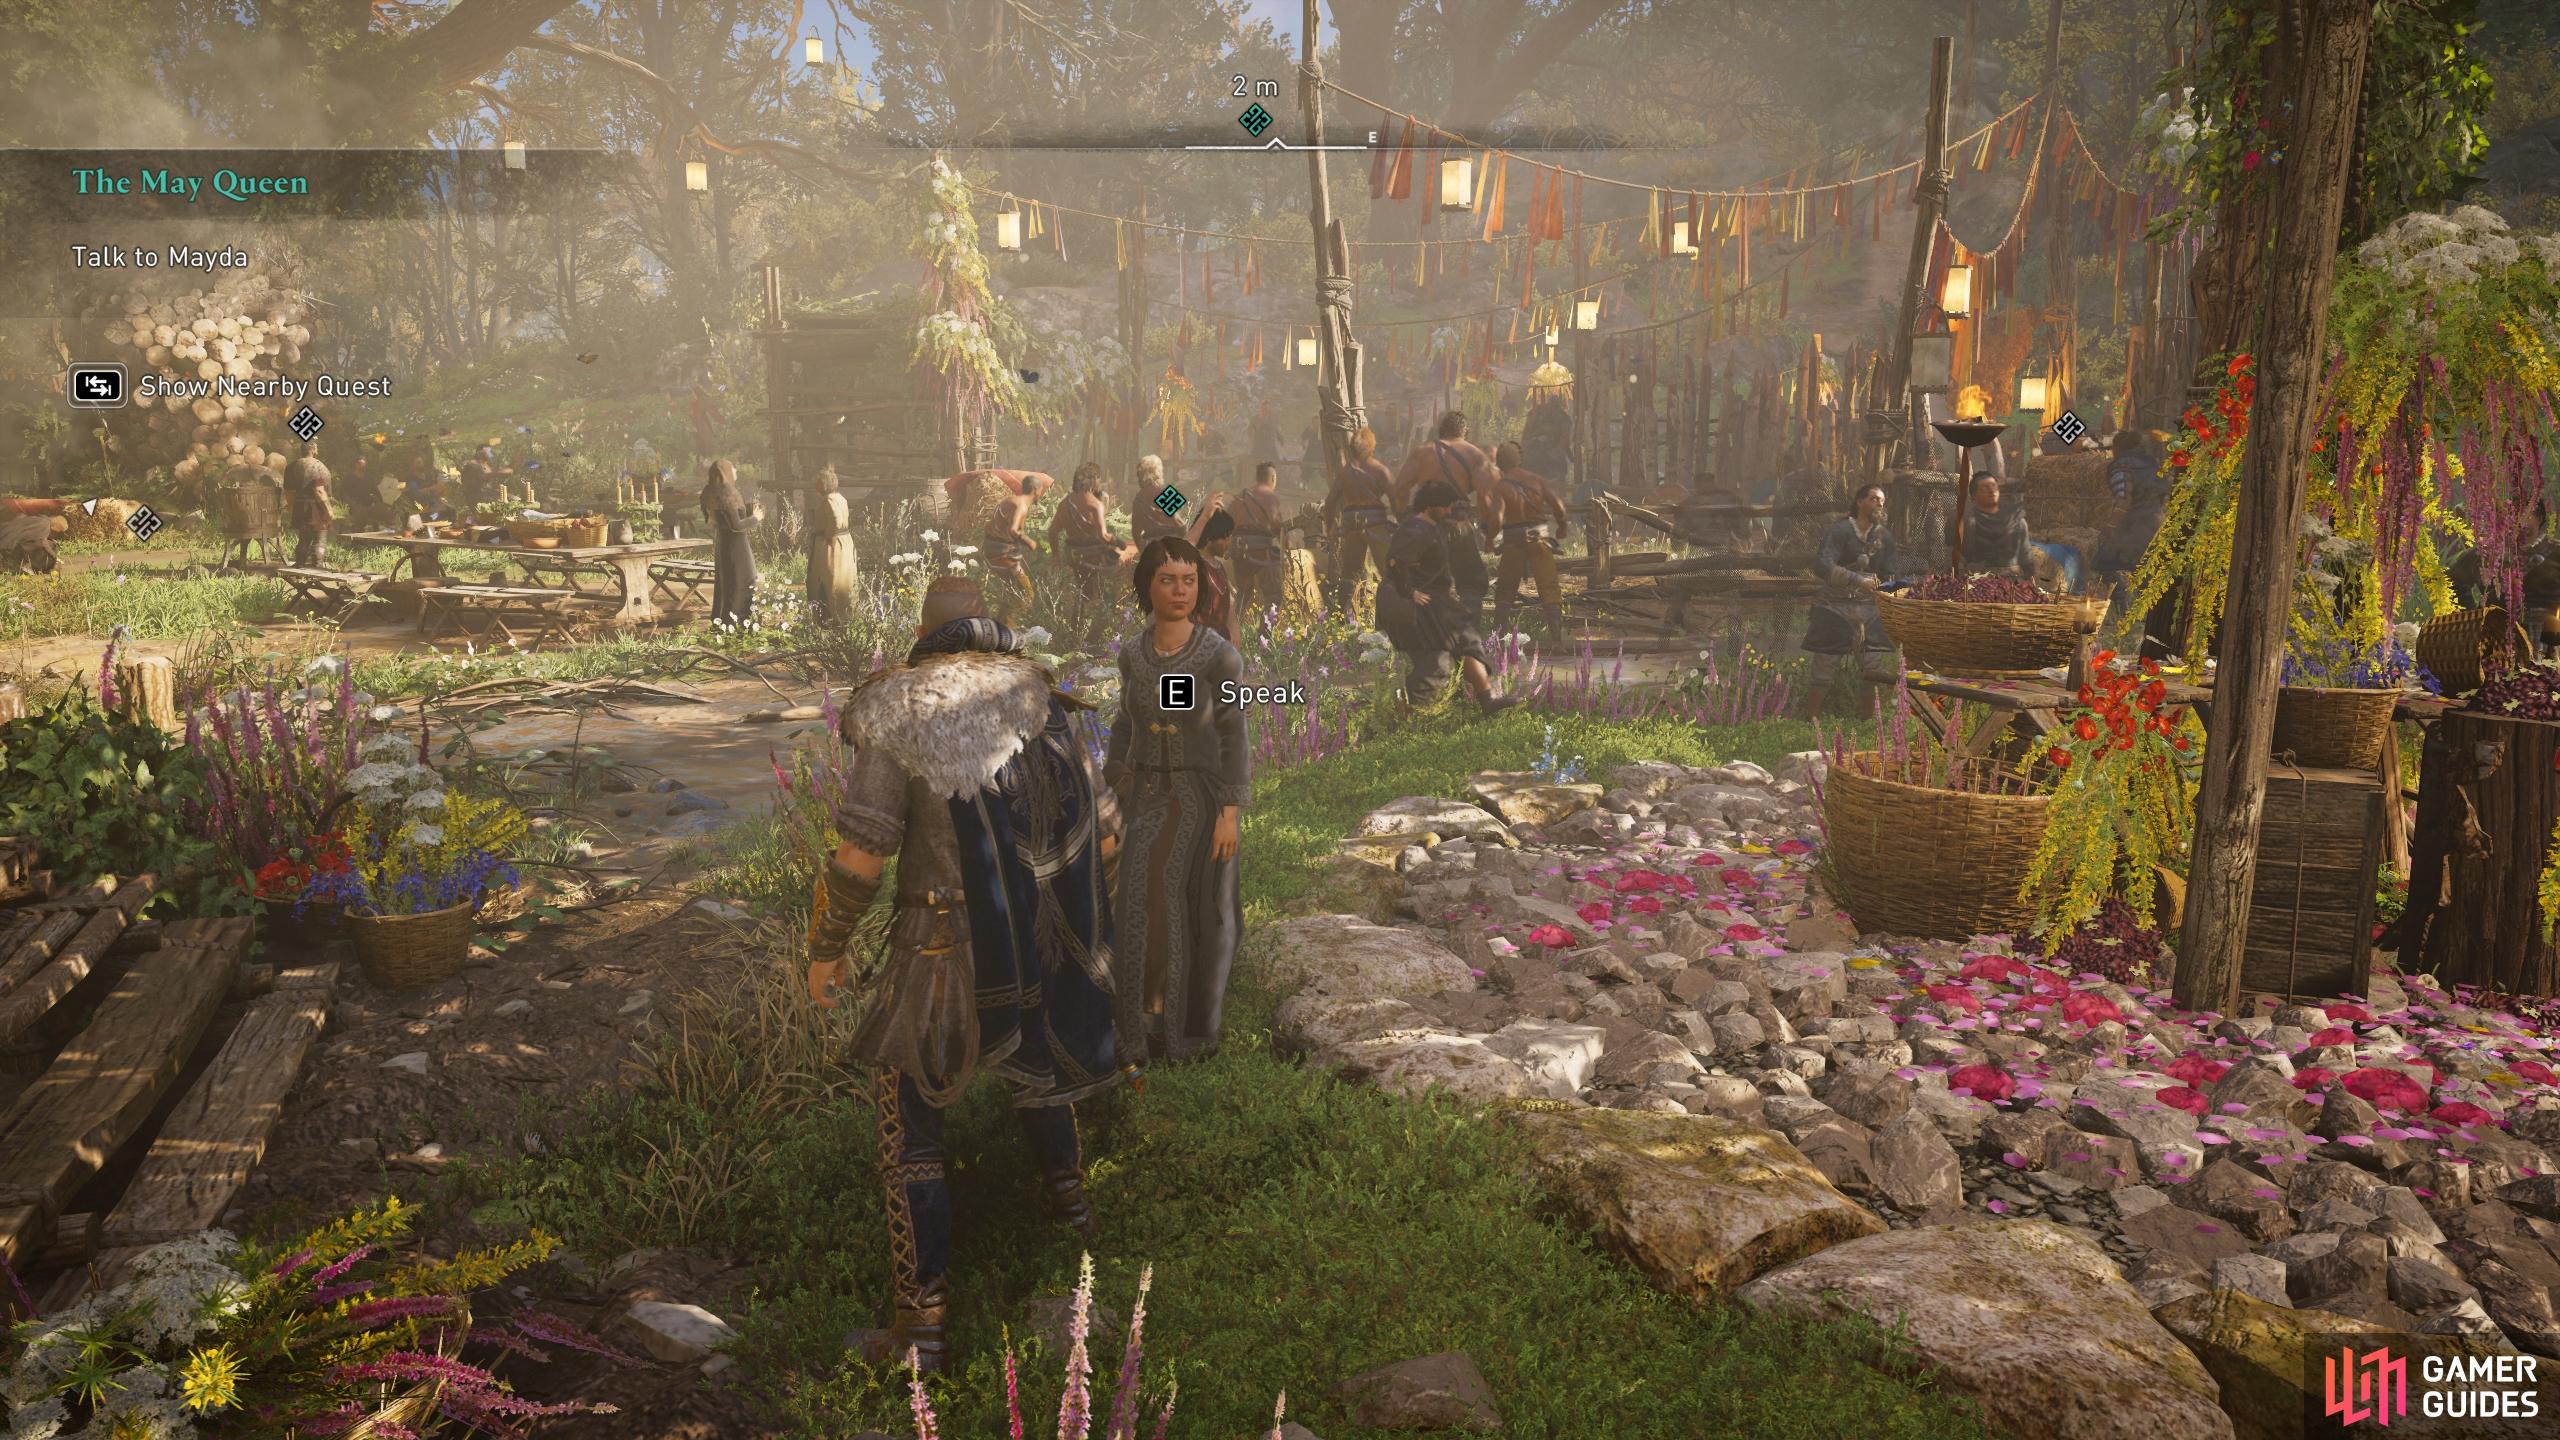 Speak with Mayda in the festival grounds of Ravensthorpe to begin the quest.